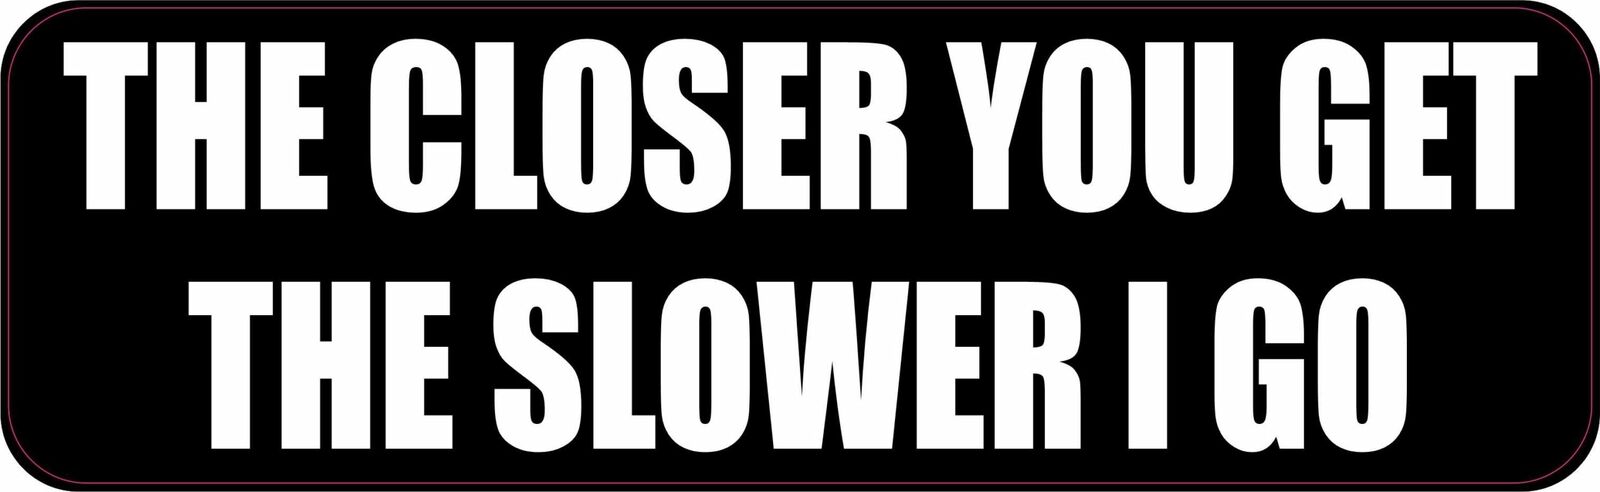 10in x 3in The Closer You Get the Slower I Go Magnet Car Vehicle Magnetic Sign